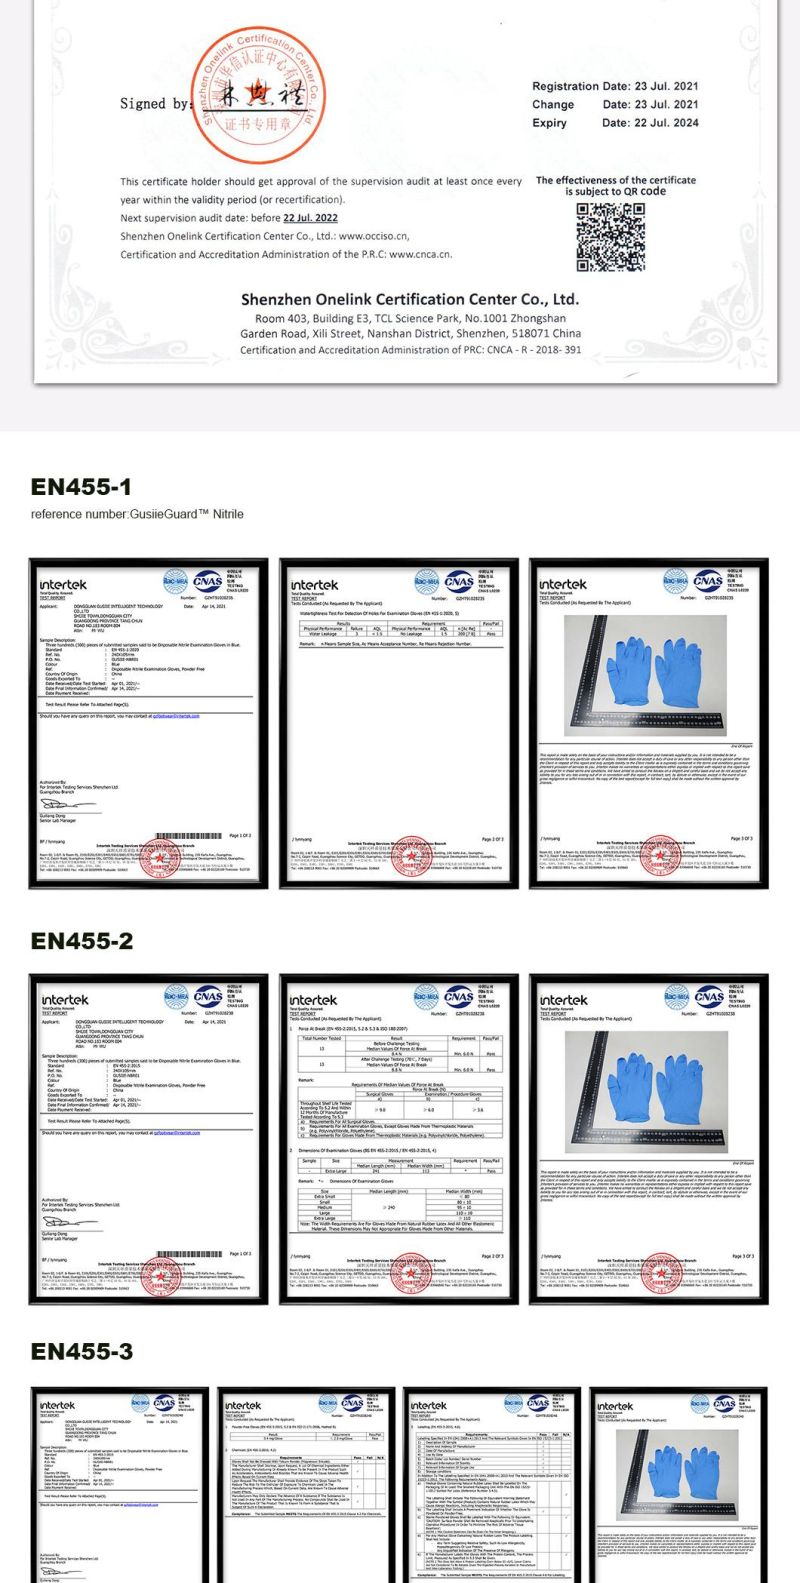 Disposable Medical Examination Gloves Safety Exam Nitrile Gloves Without Powderfactory Direct Supply of Goods